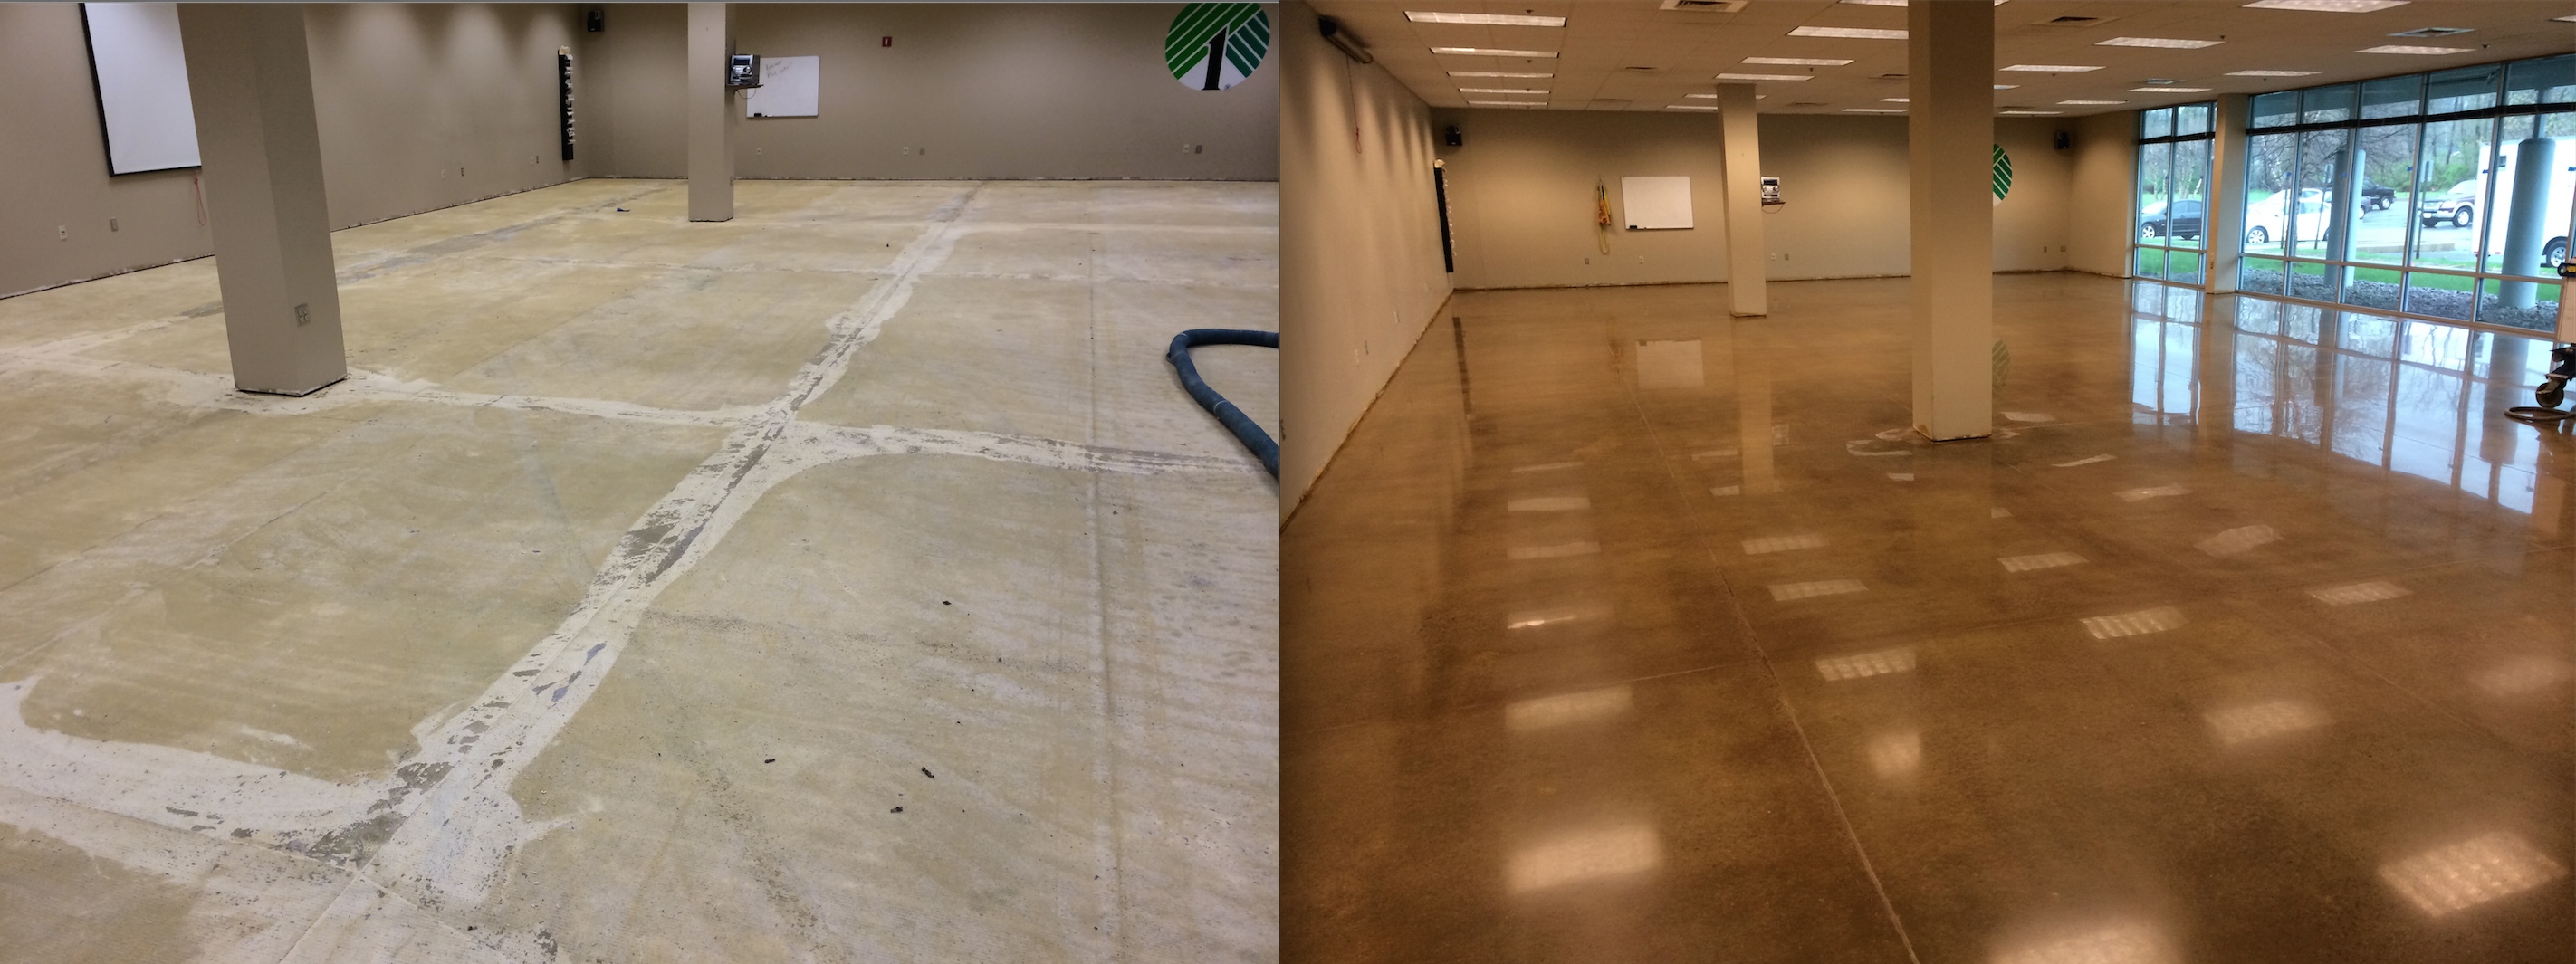 Concrete Floor Solutions Inc Concrete Polishing And Staining